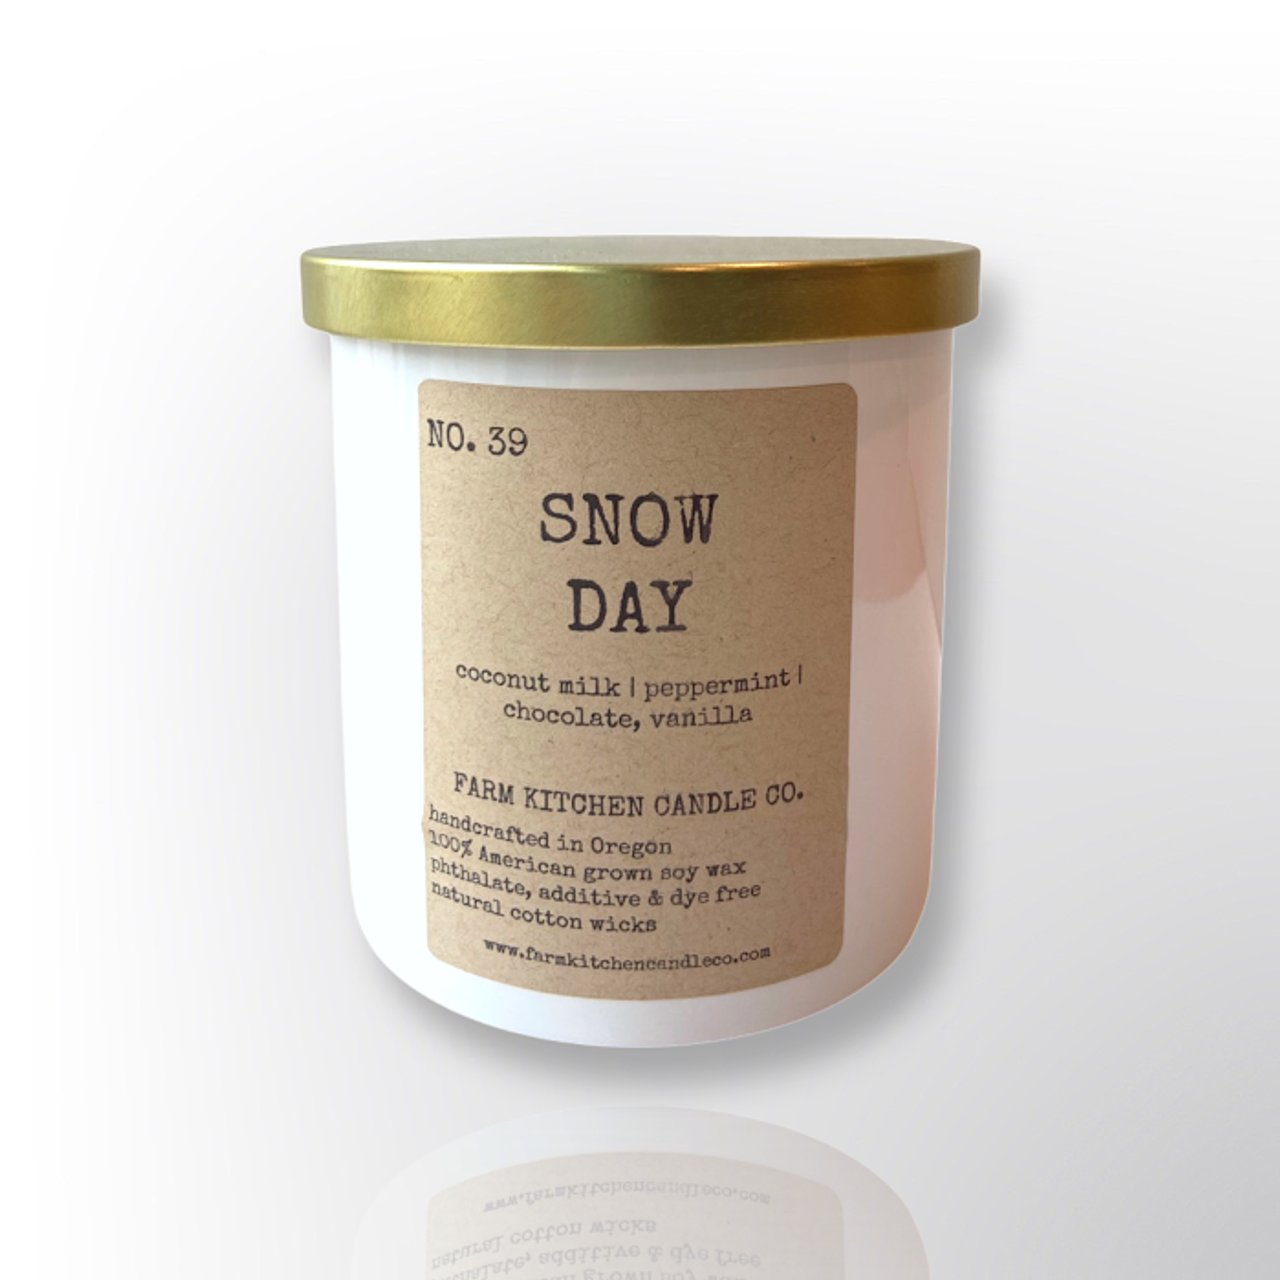 FARM KITCHEN CANDLE CO - SINGLE WICK SOY CANDLE IN SNOW DAY